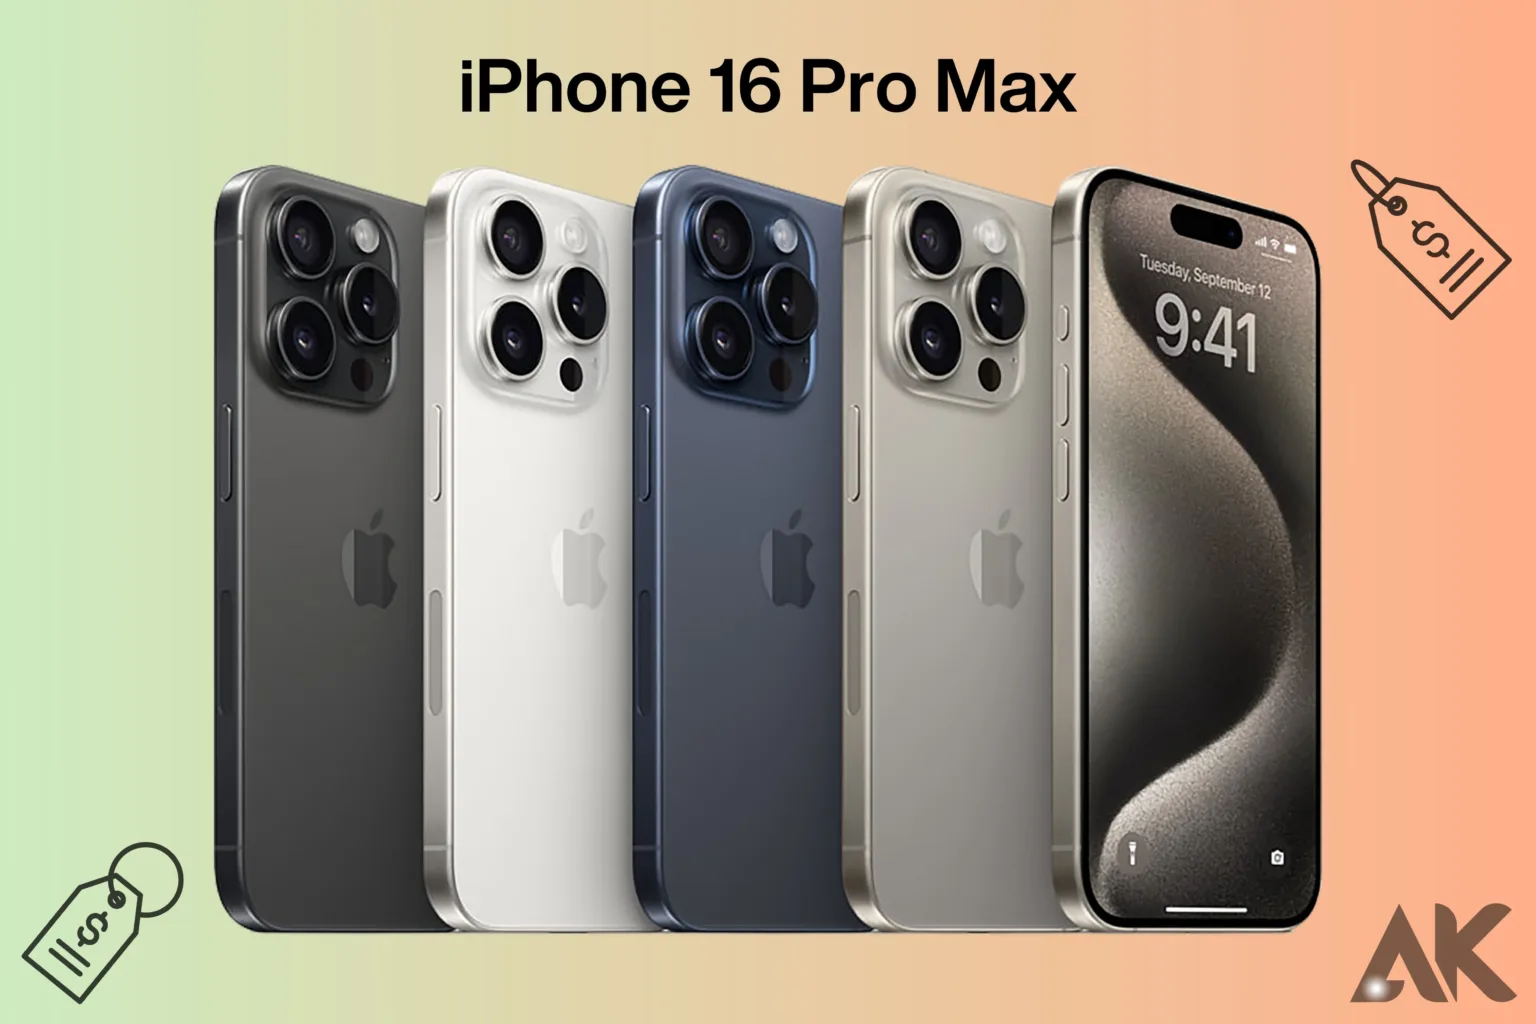 How Much is iPhone 16 Pro Max